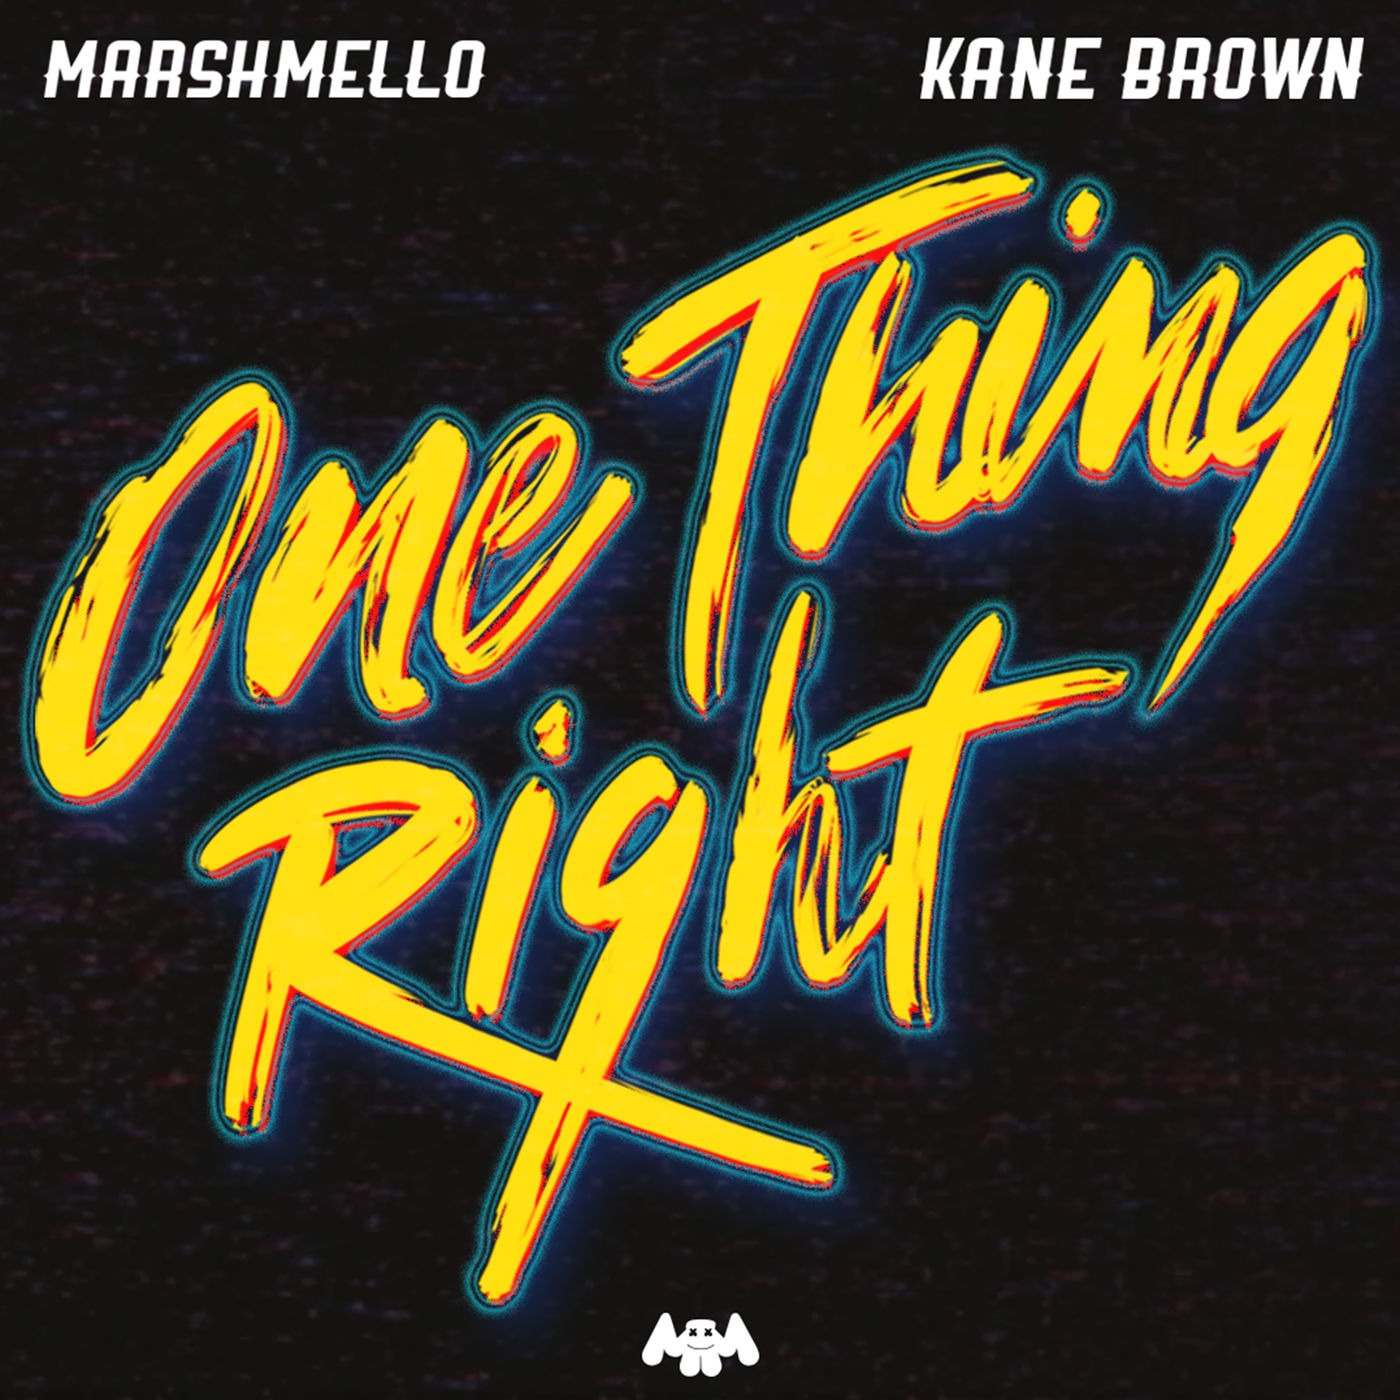 kane brown one thing right